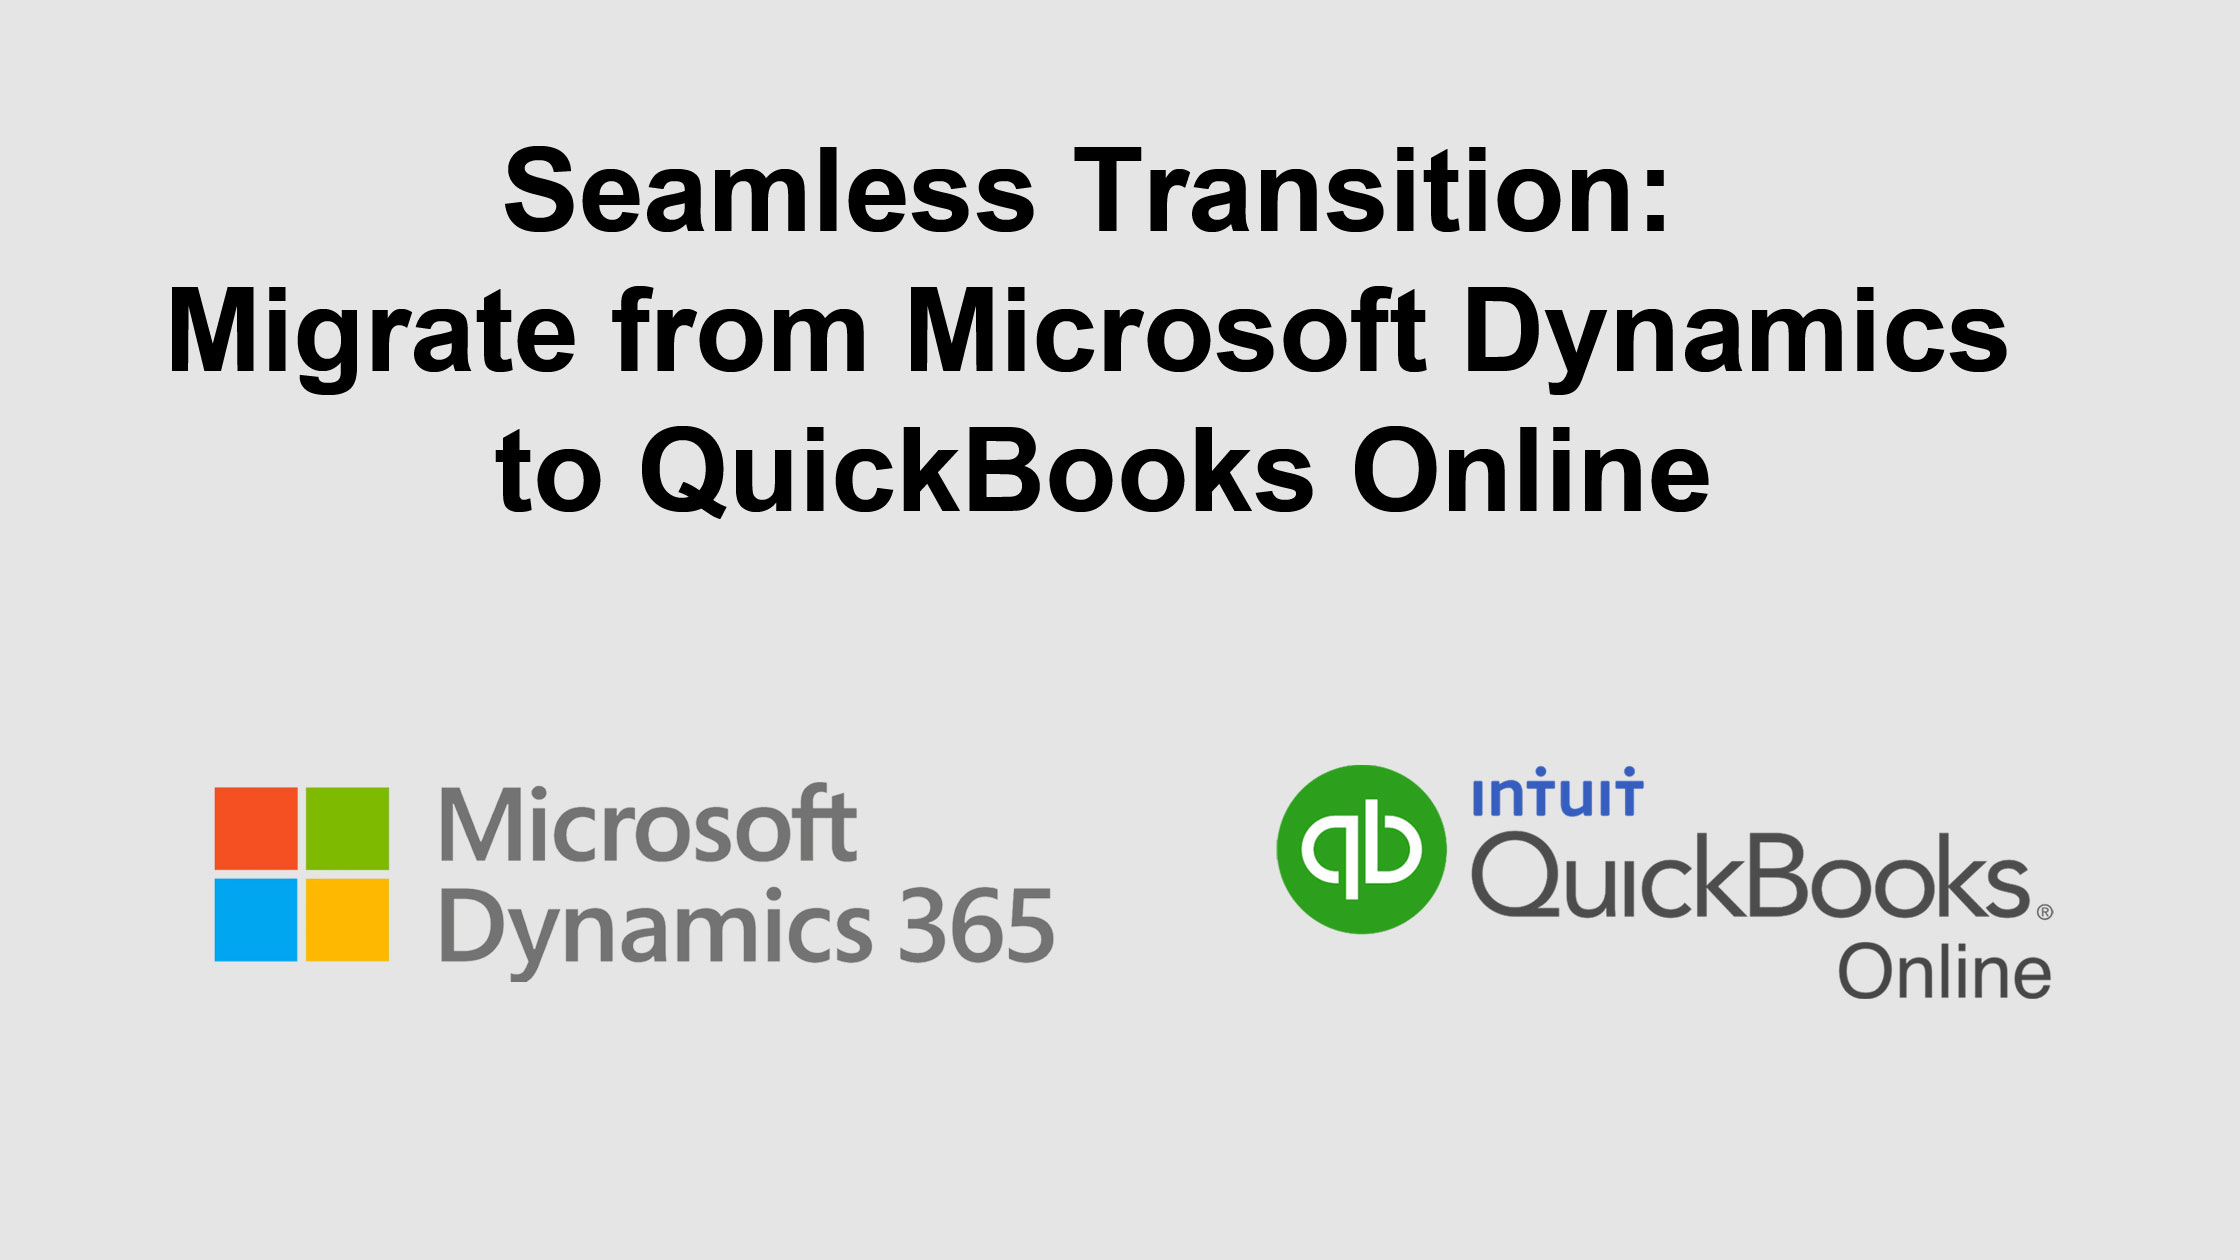 Seamless Transition: Migrate from Microsoft Dynamics to QuickBooks Online